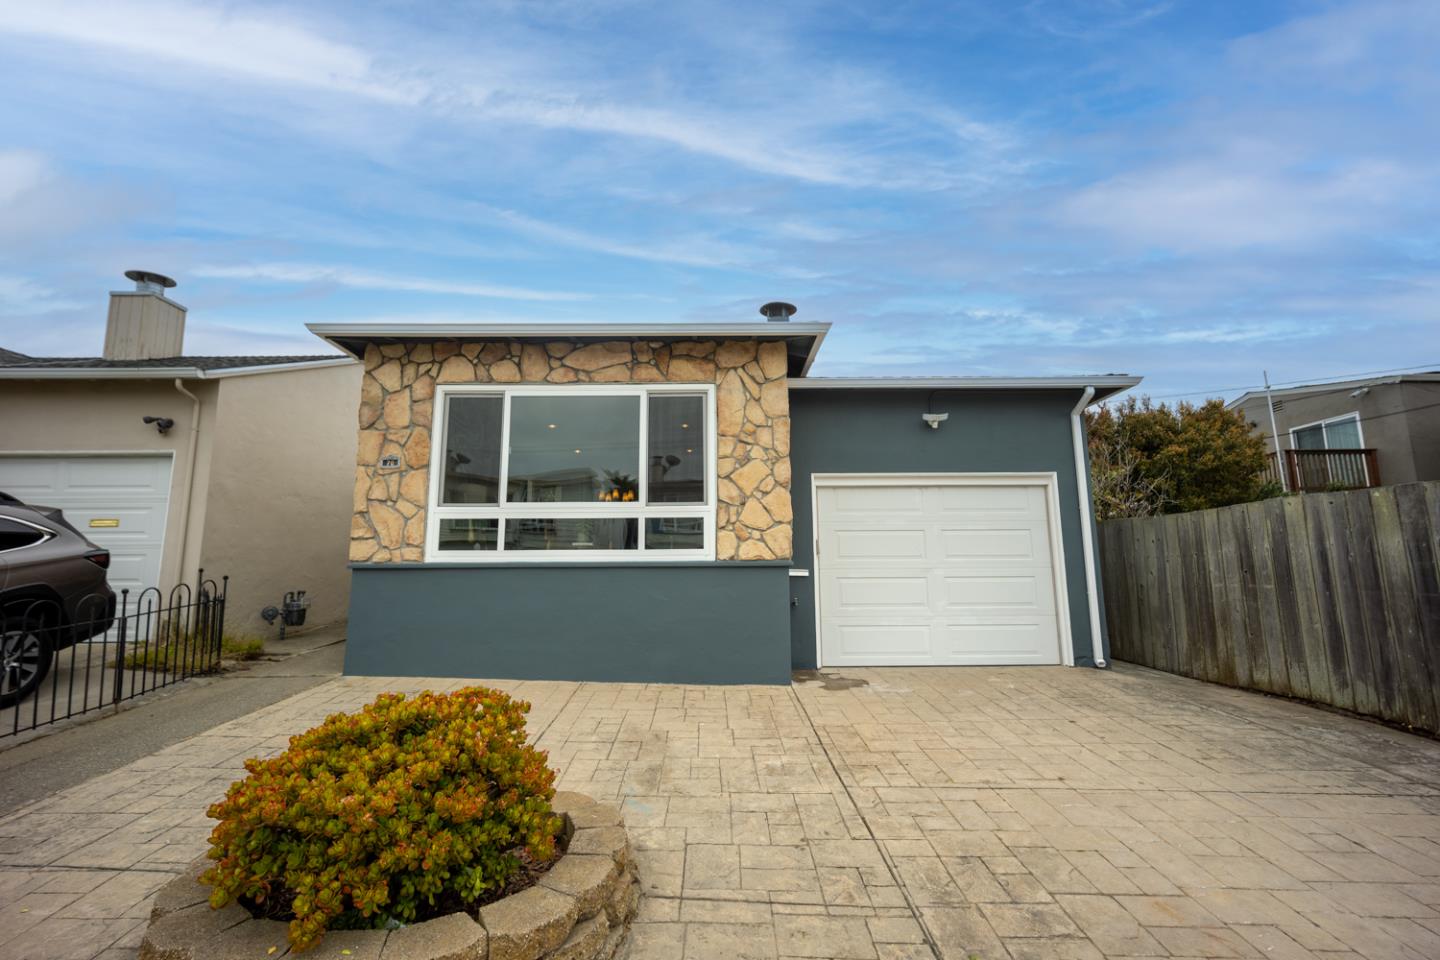 Photo of 70 Midvale Dr in Daly City, CA